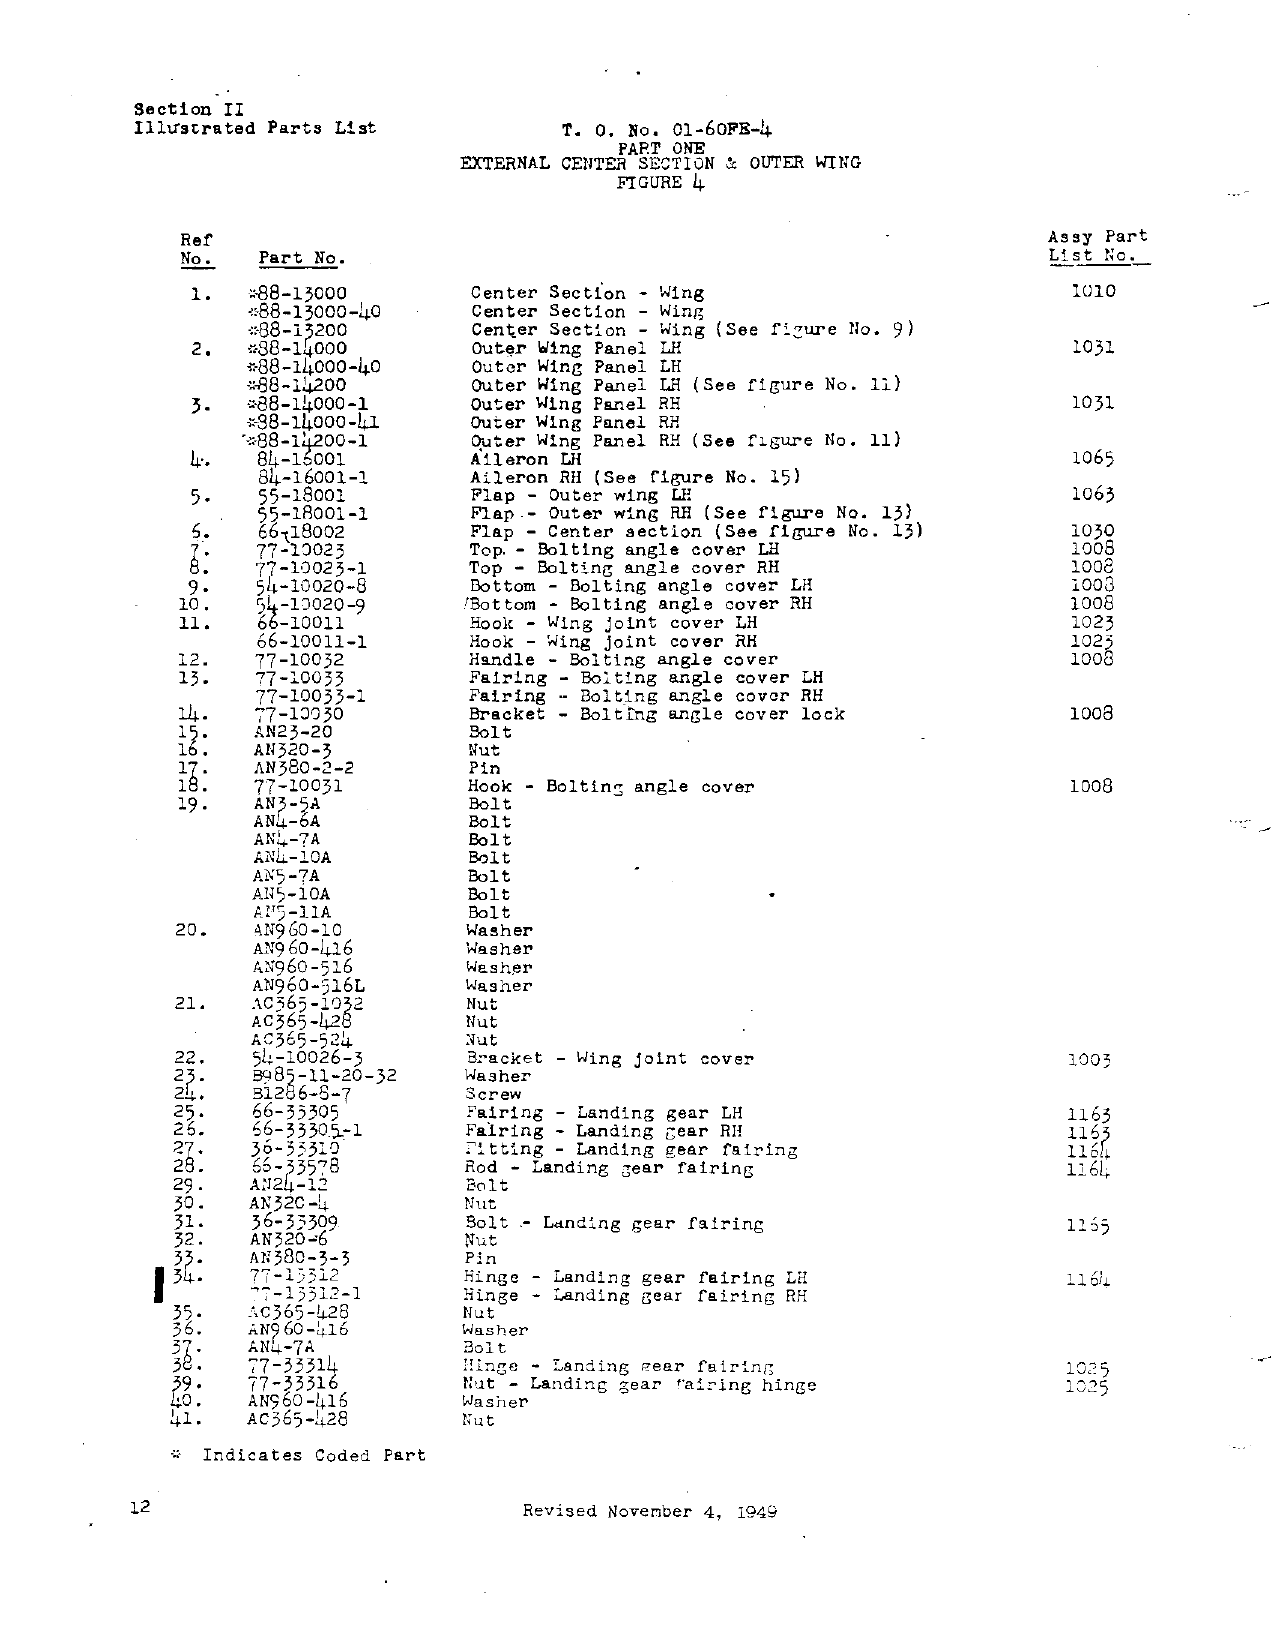 Sample page 6 from AirCorps Library document: Illustrated Parts Catalog for AT-6C and SNJ-4 Airplanes 